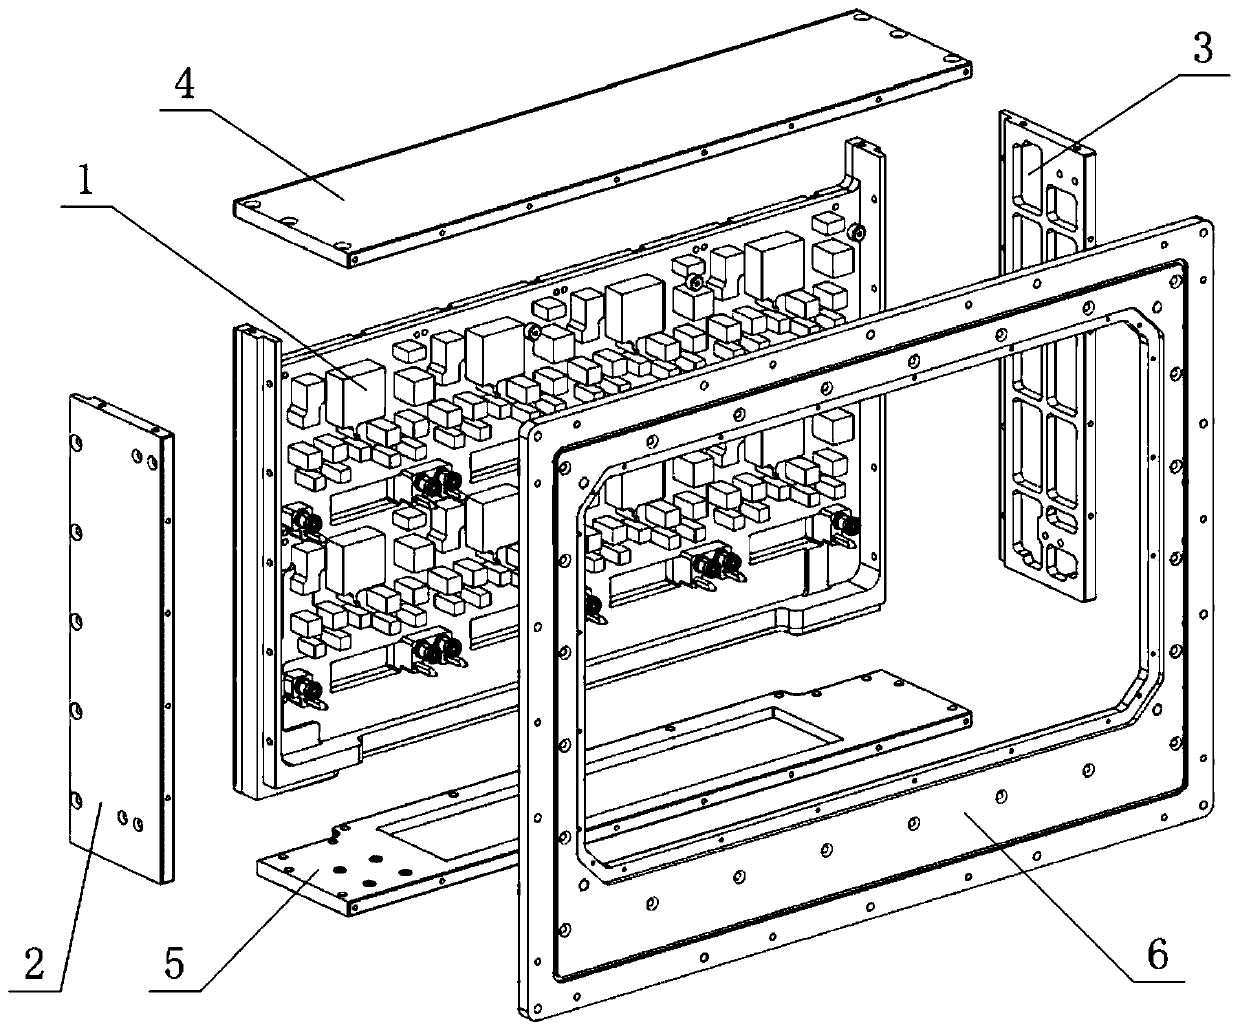 Box structure based on cold plate